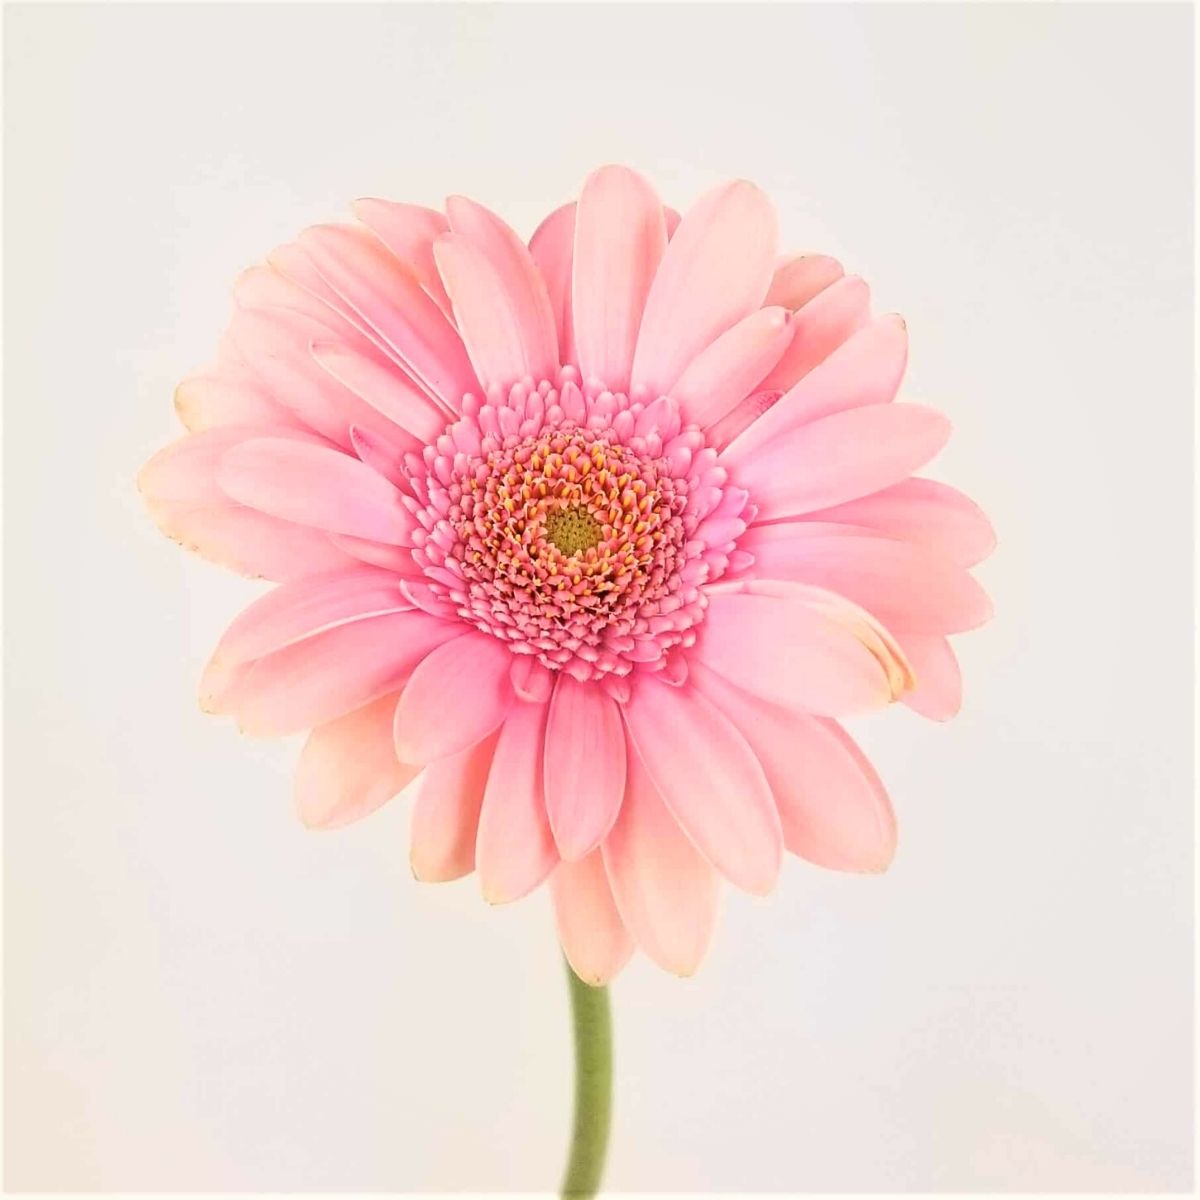 Breast cancer awareness month with pink gerbera daisies on Thursd